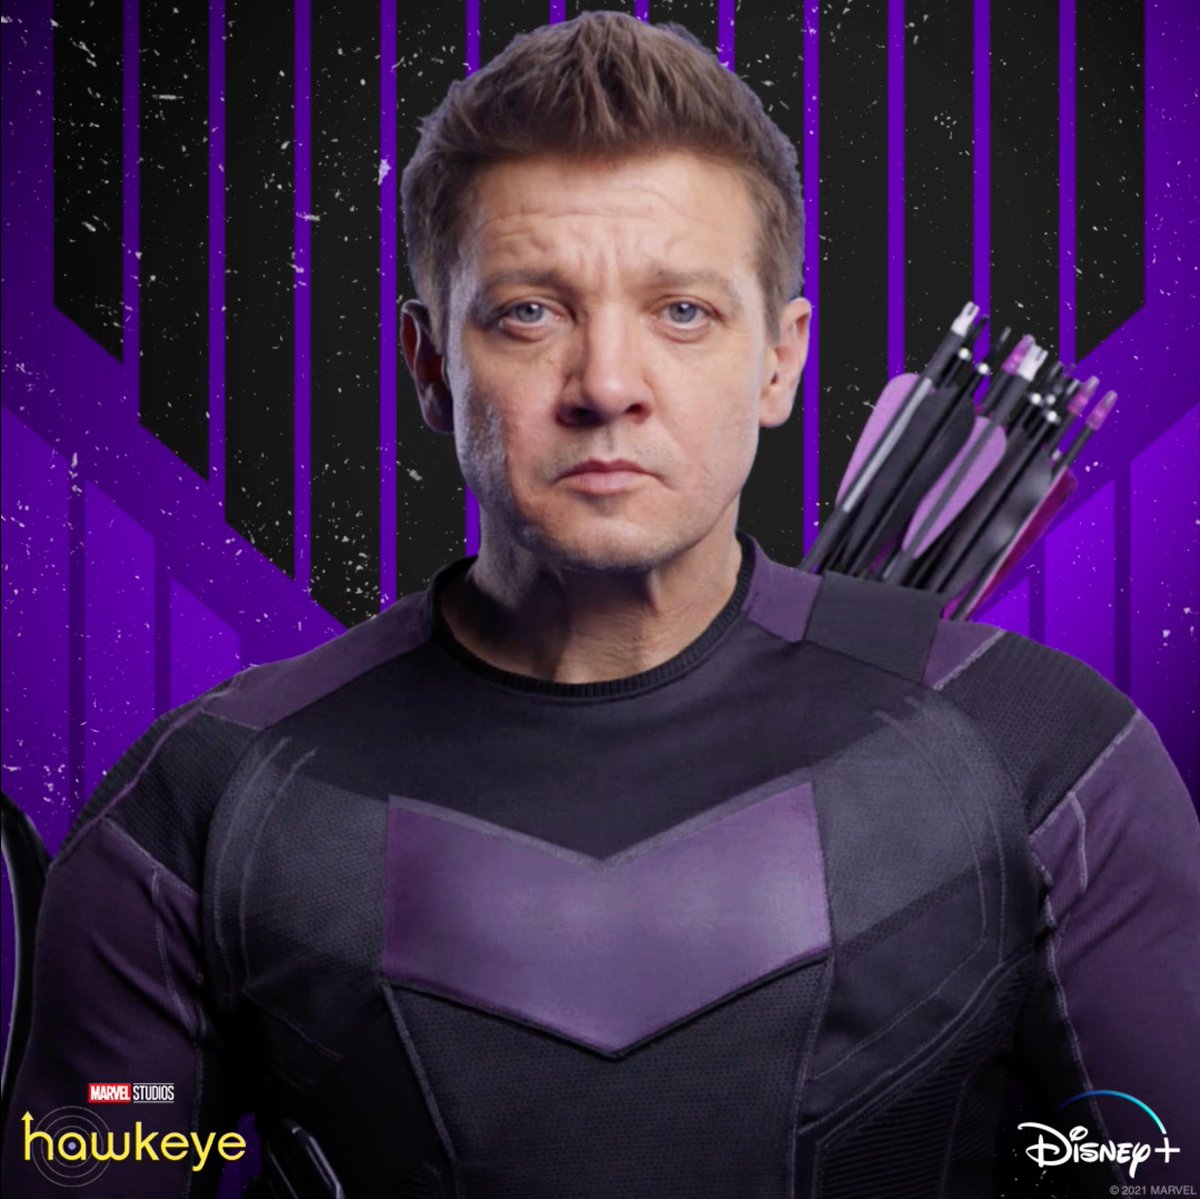 'Hawkeye' Star Jeremy Renner in 'Critical' Condition After Weather-related Accident